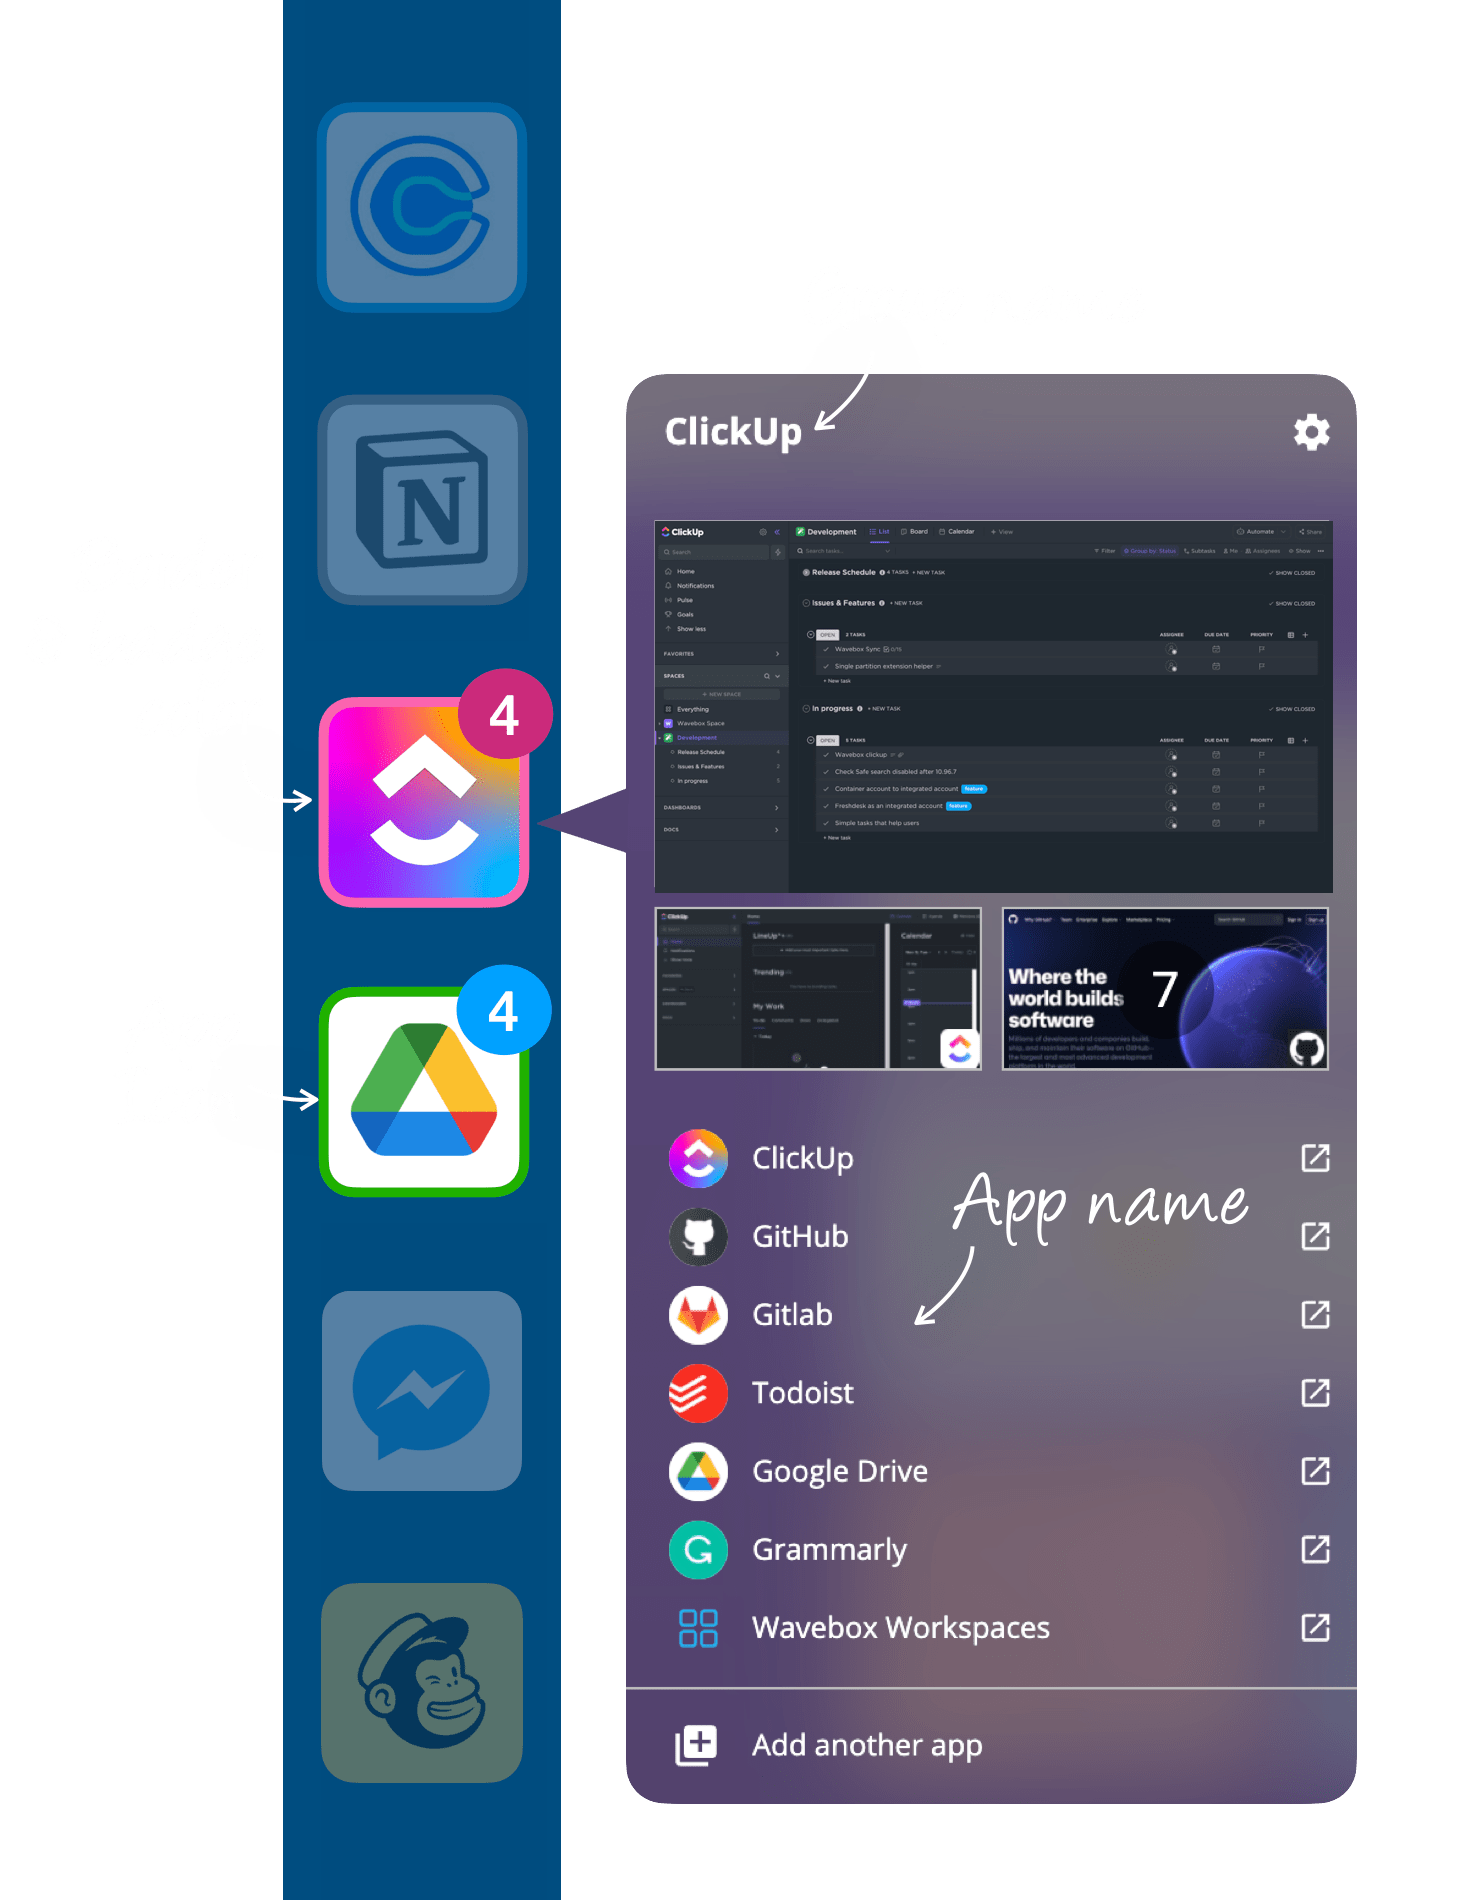 Customize icons, colors and themes.